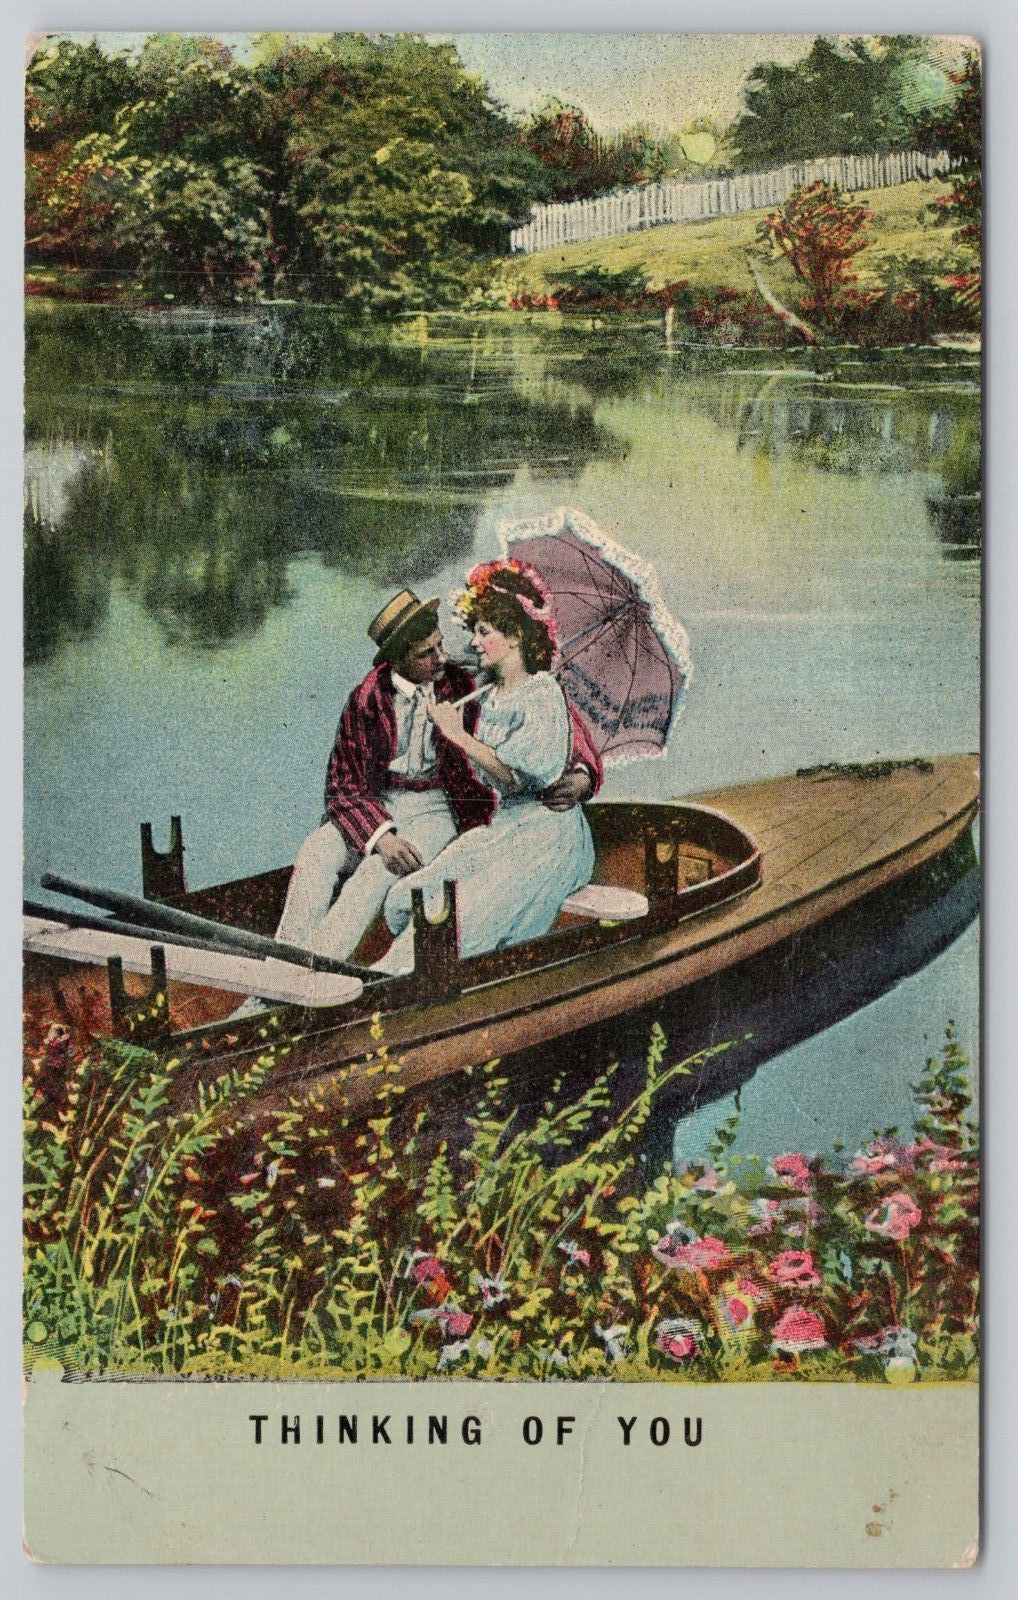 Postcard Thinking of You, Couple on Lake in Rowboat, Romance Vintage PM 1912